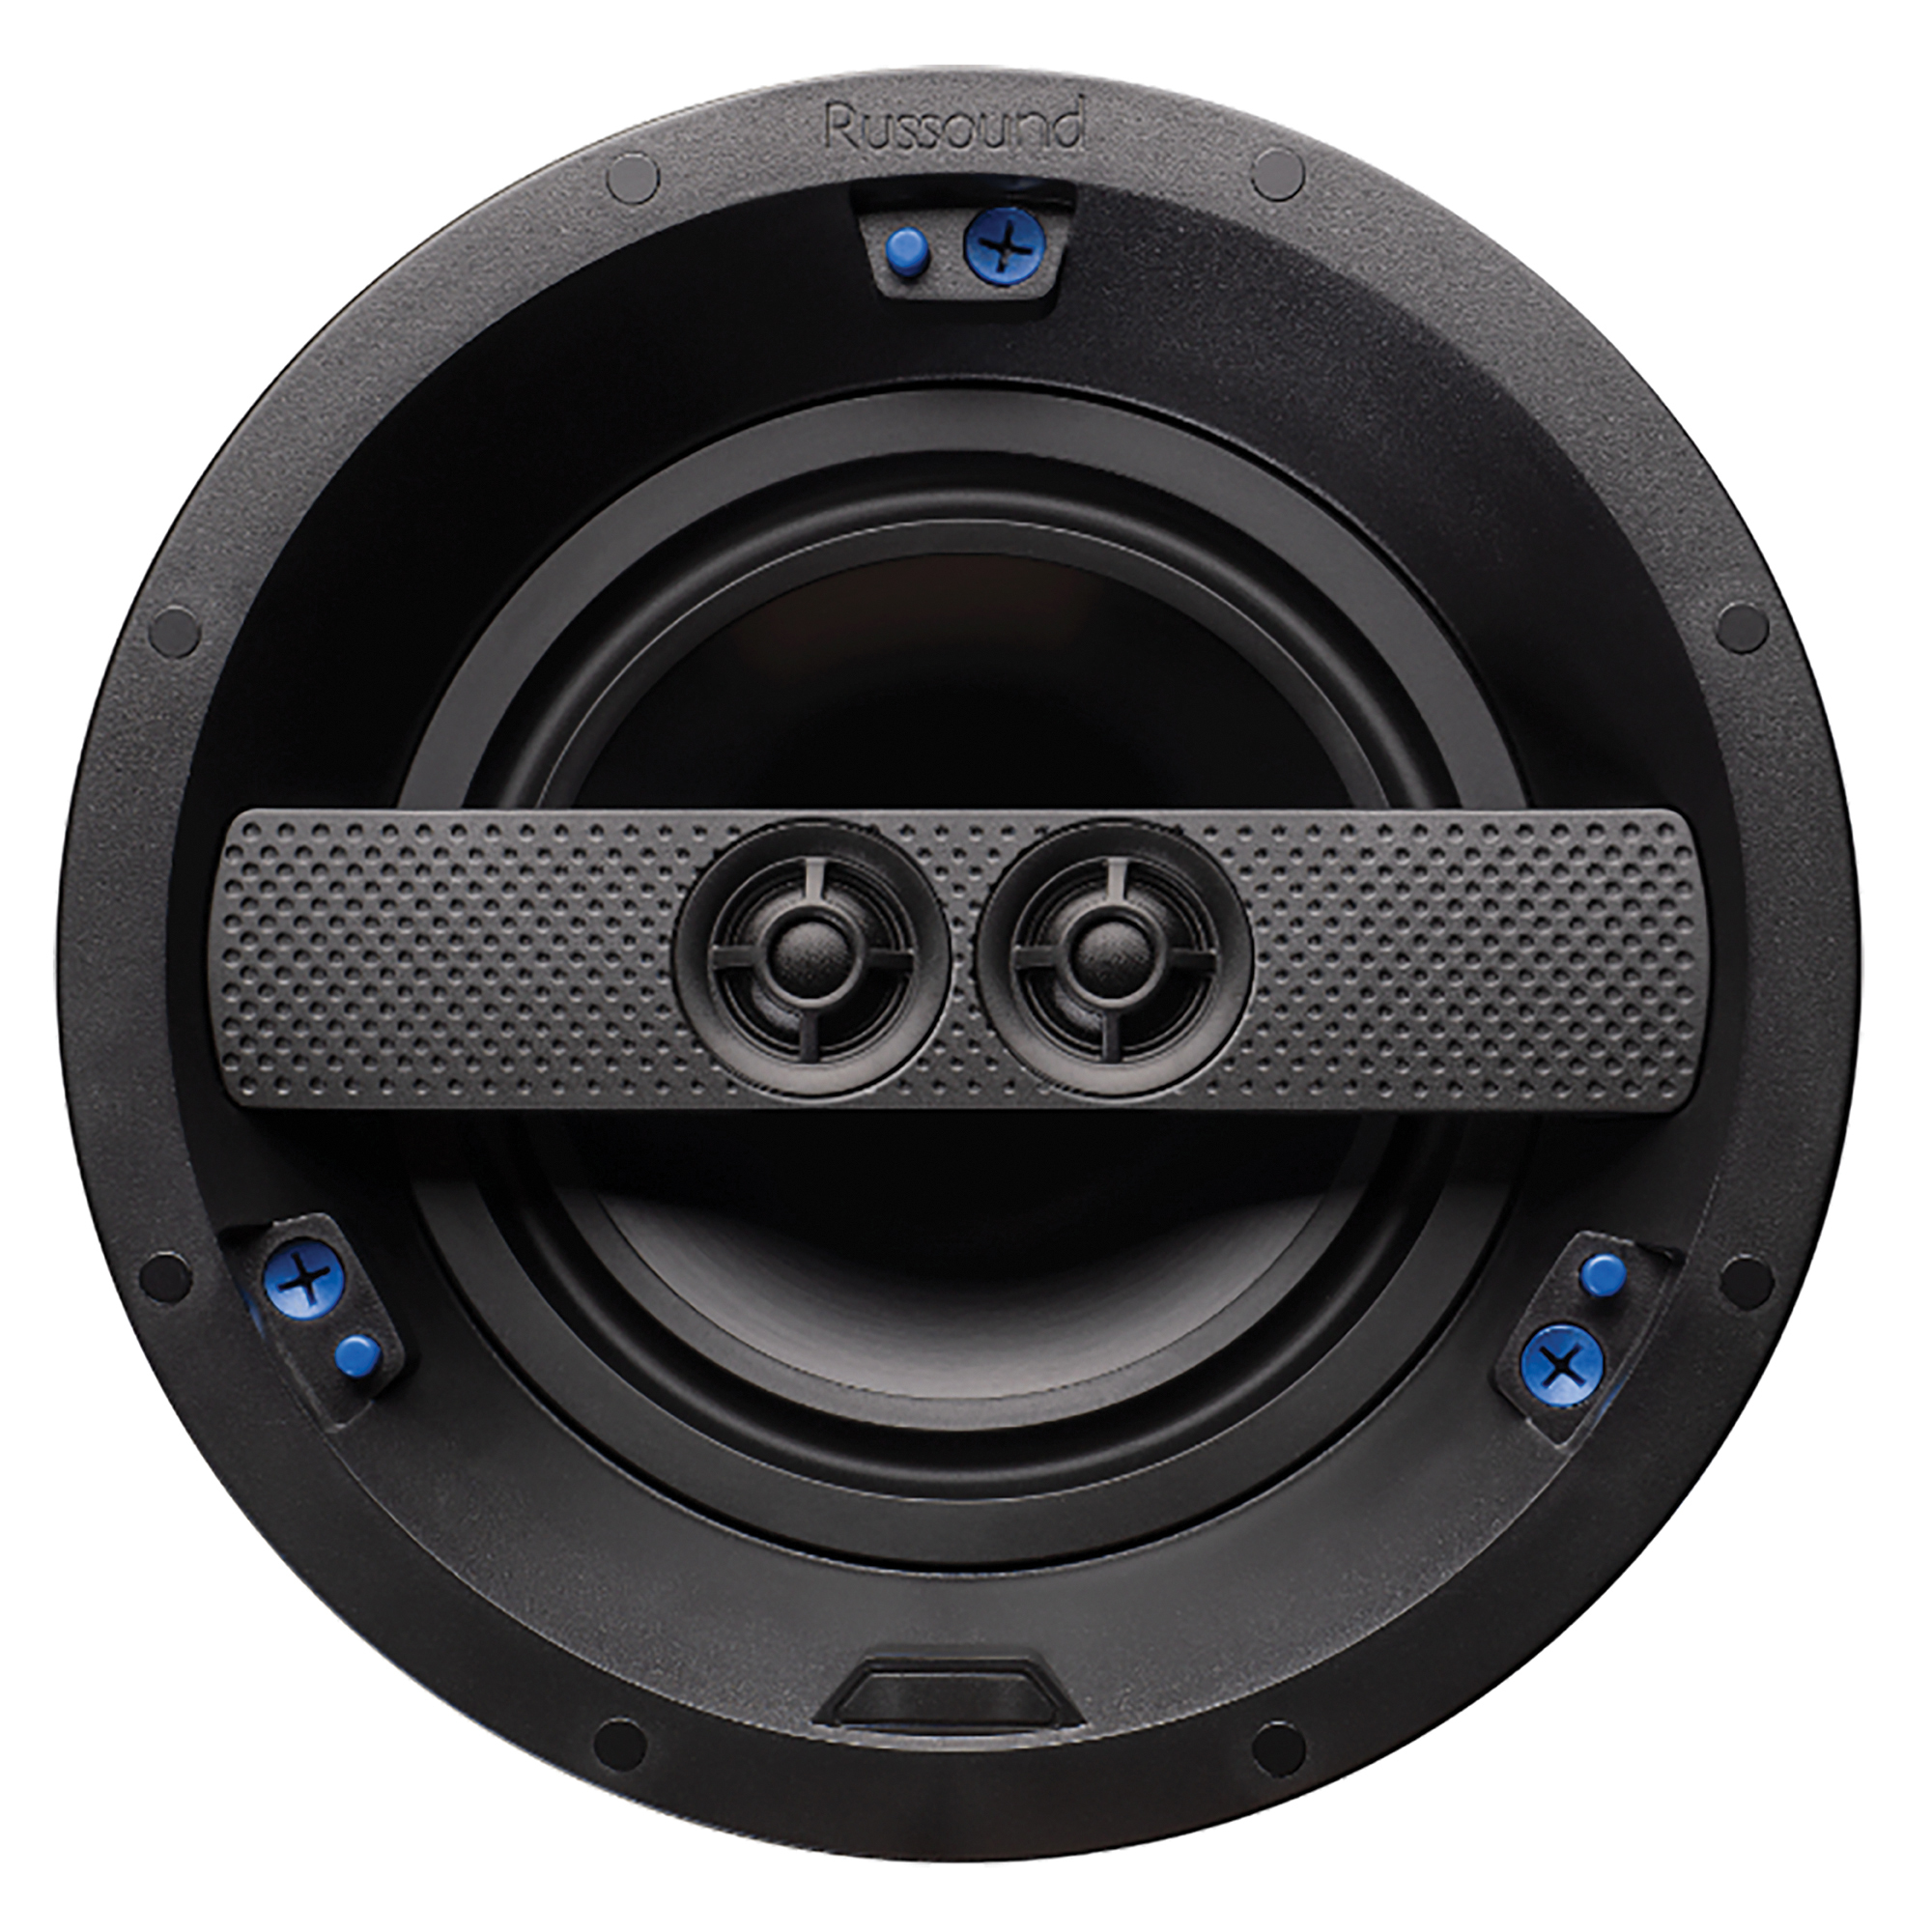 Russound Architectural Series, Enhanced Performance In-Ceiling Stereo Speaker, Watts 100 Model 3175-853616